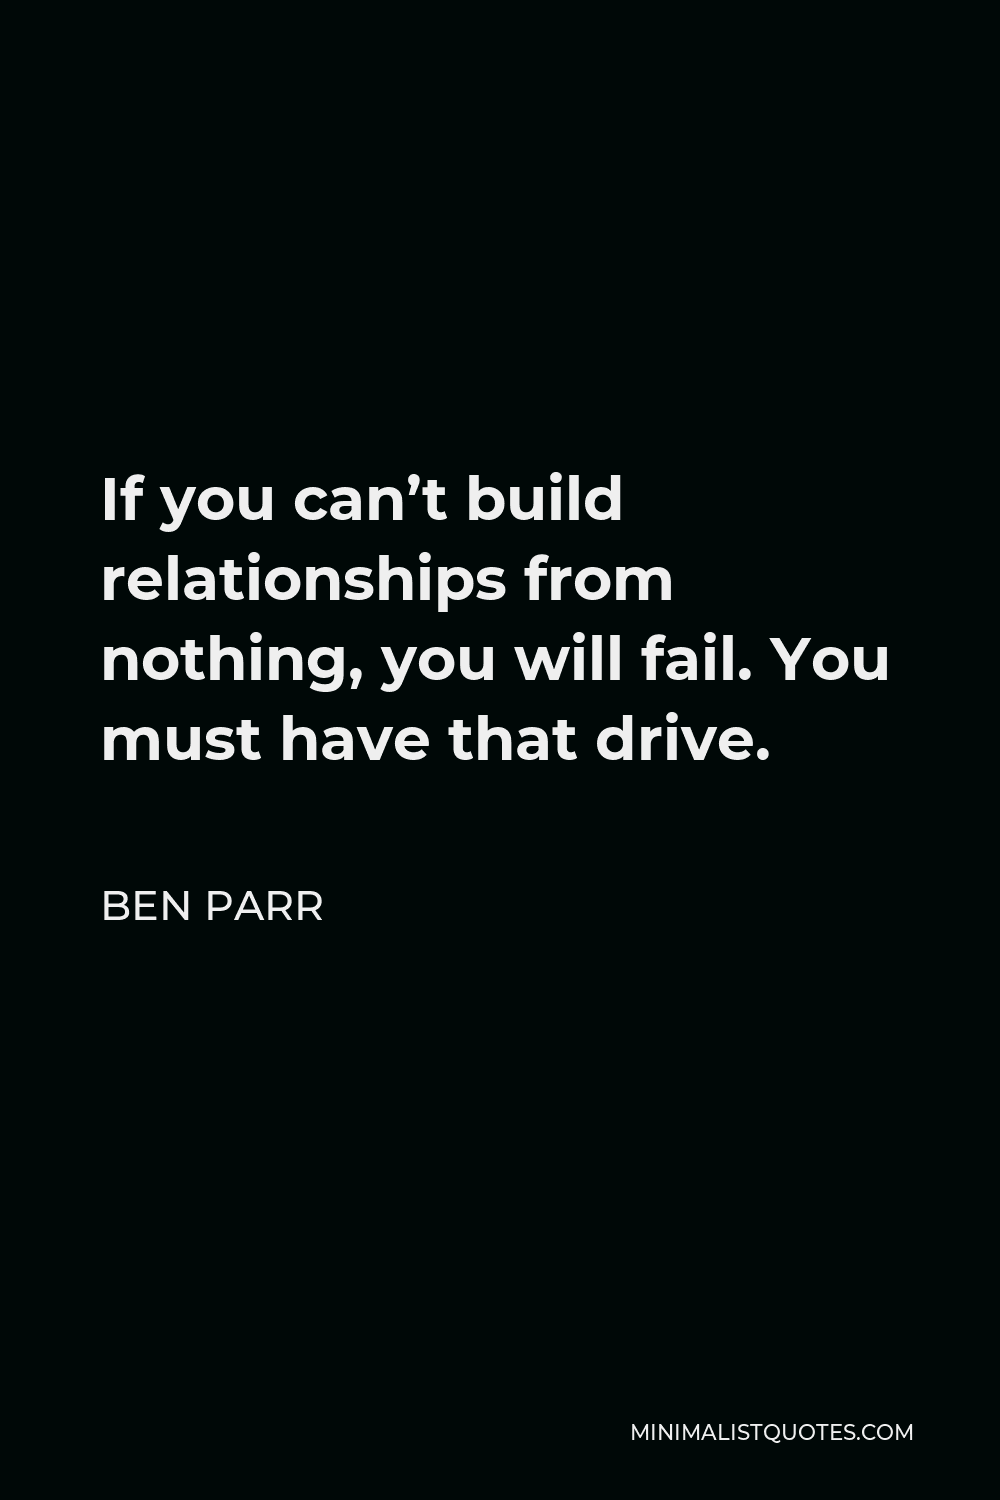 Ben Parr Quote - If you can’t build relationships from nothing, you will fail. You must have that drive.